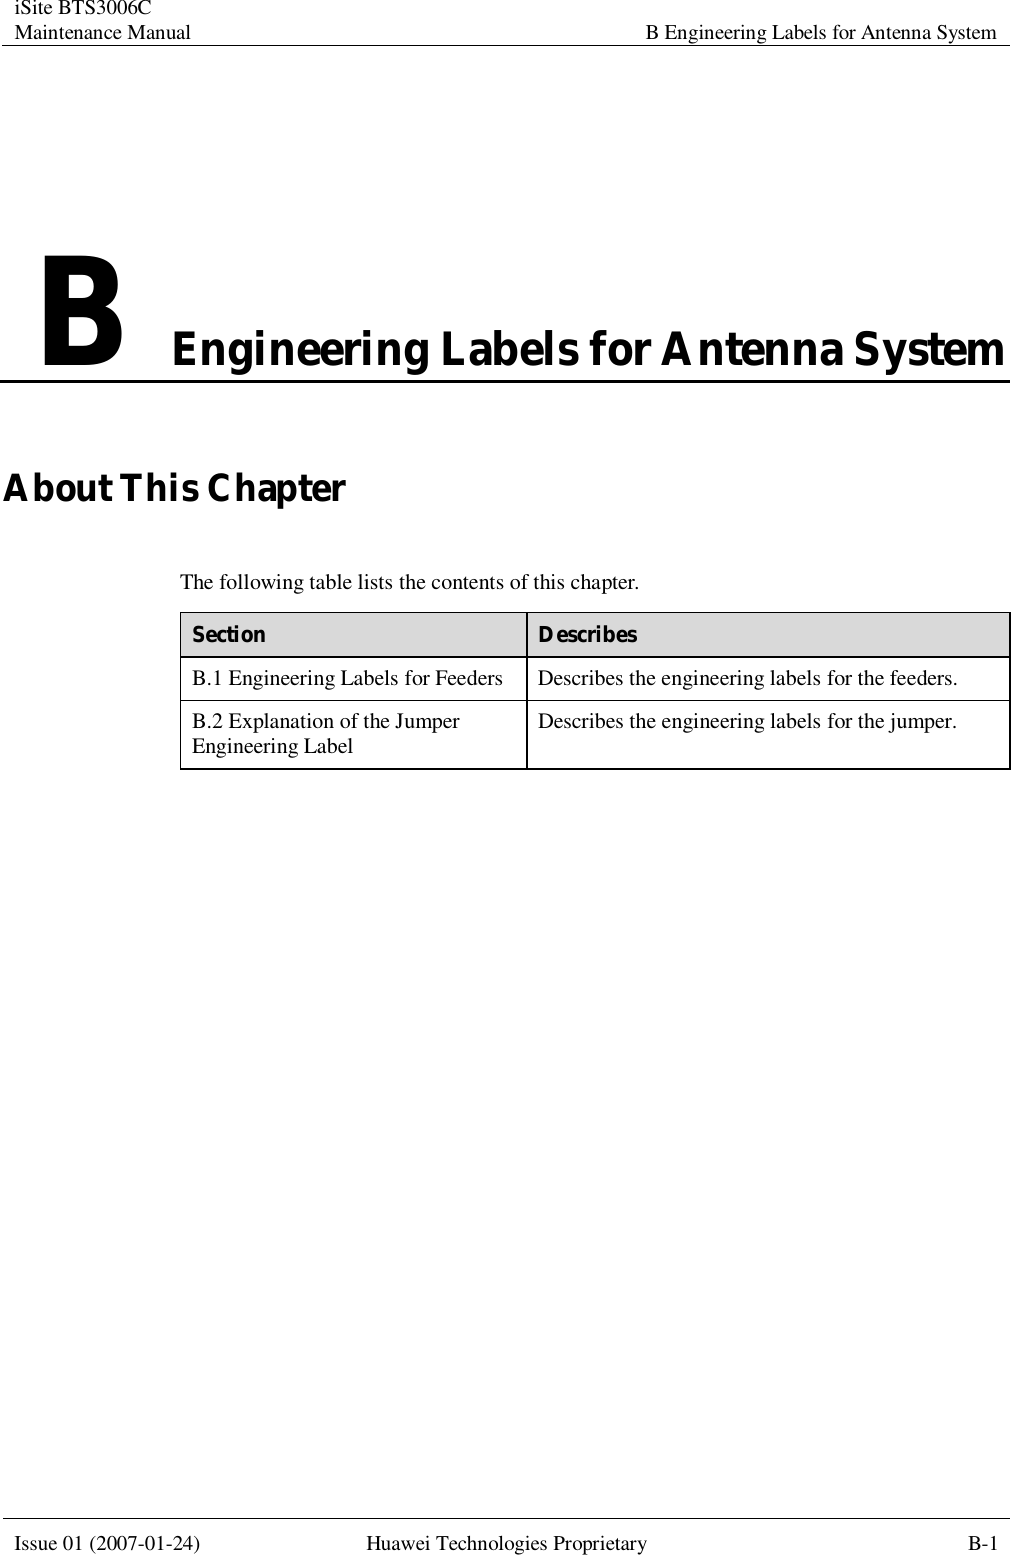 iSite BTS3006C Maintenance Manual B Engineering Labels for Antenna System  Issue 01 (2007-01-24) Huawei Technologies Proprietary B-1  B Engineering Labels for Antenna System About This Chapter The following table lists the contents of this chapter. Section  Describes B.1 Engineering Labels for Feeders Describes the engineering labels for the feeders. B.2 Explanation of the Jumper Engineering Label  Describes the engineering labels for the jumper.  